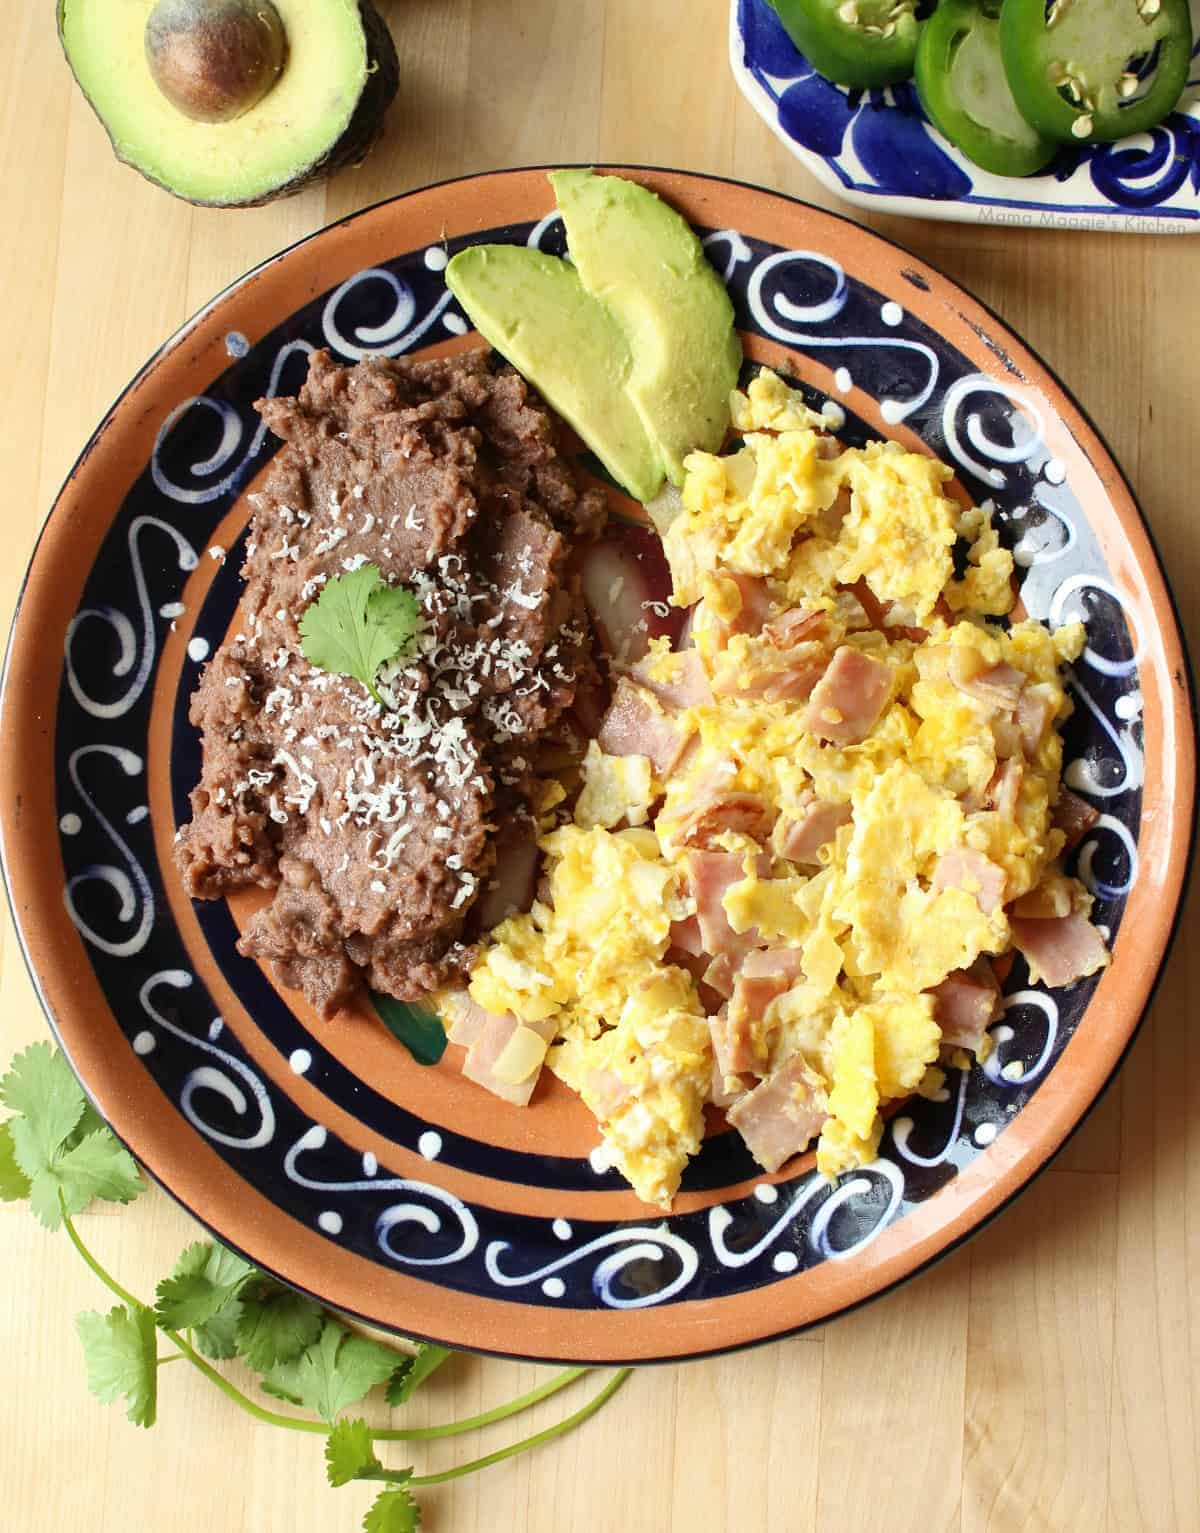 Huevos con Jamon served on a plate with a side of beans and slices of avocado.